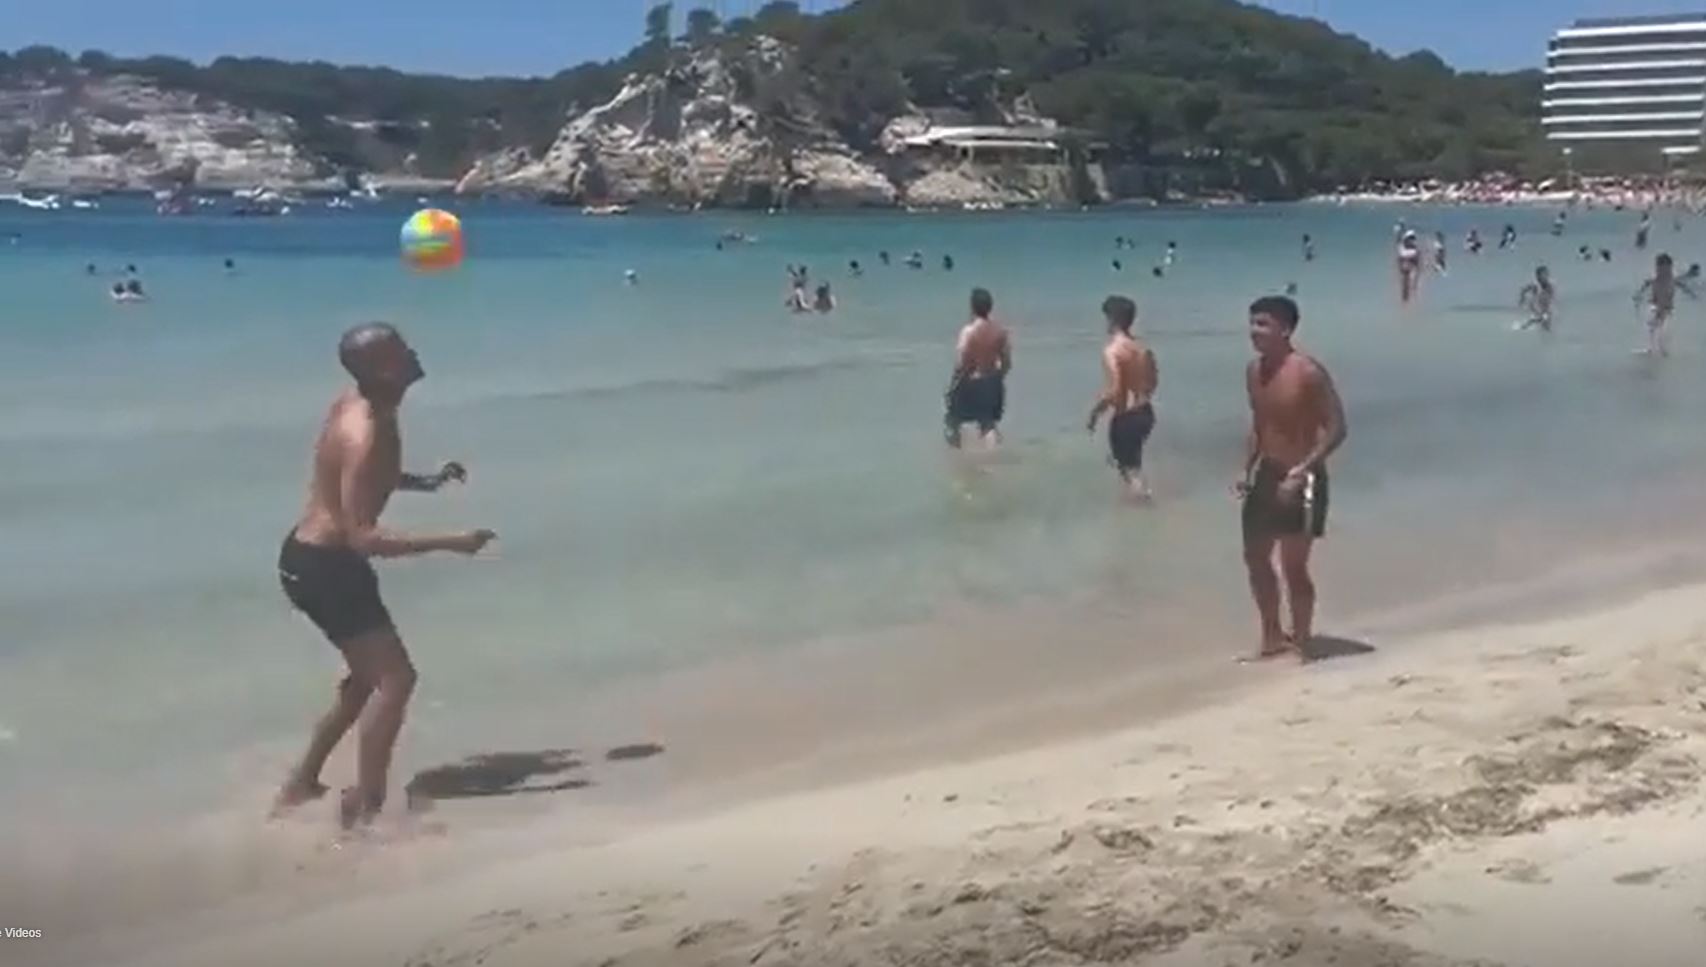 Fabinho had a kickabout at the beach with his fan after taking a selfie together